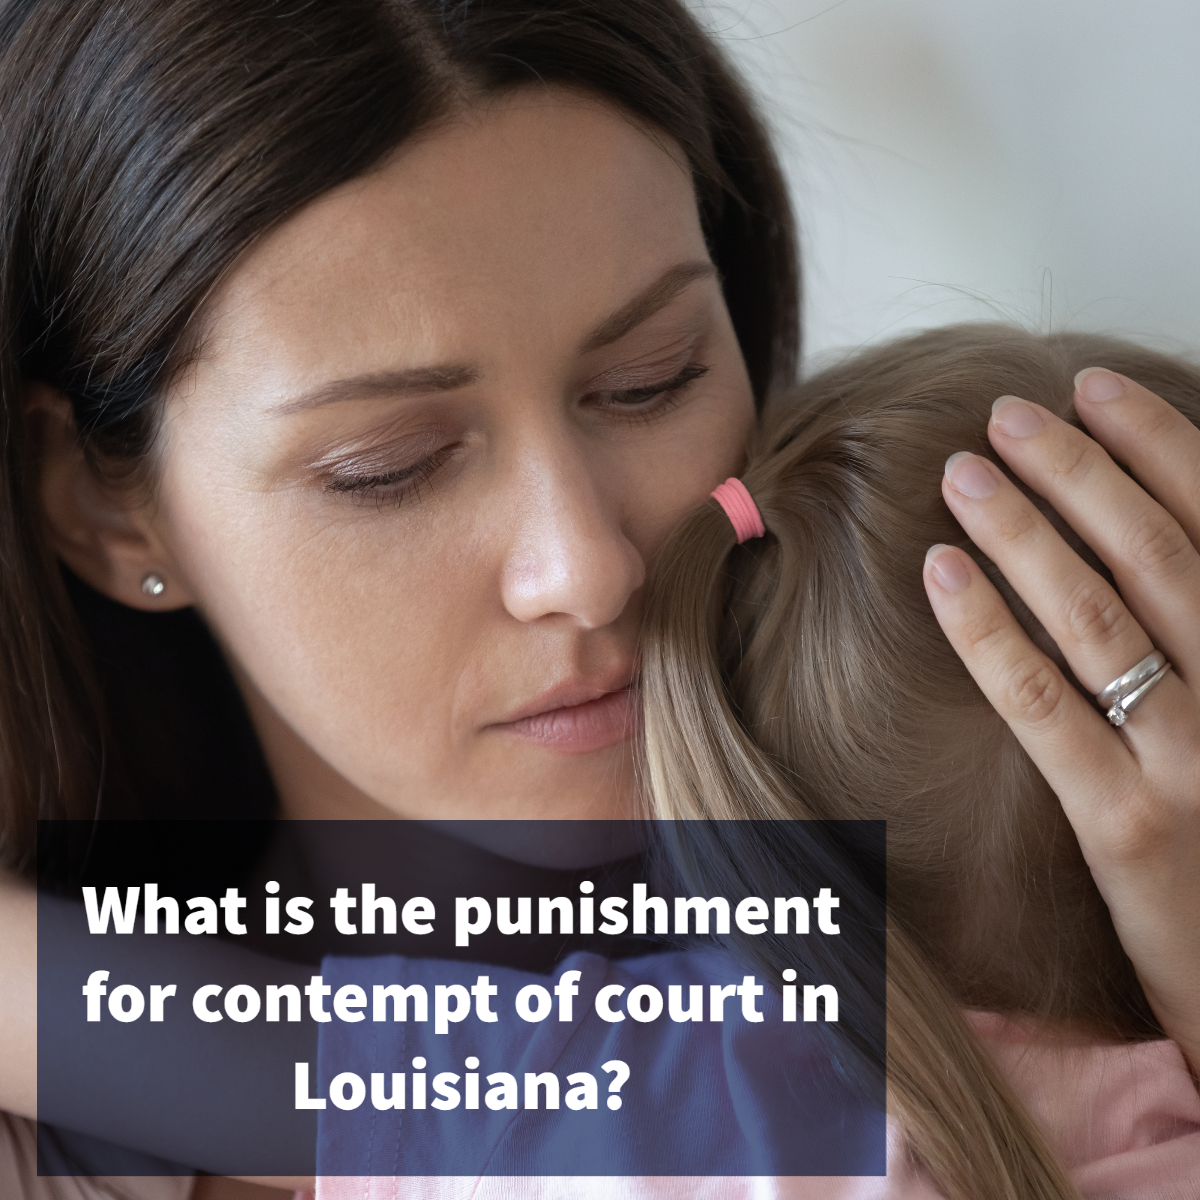 What is the punishment for contempt of court in Louisiana